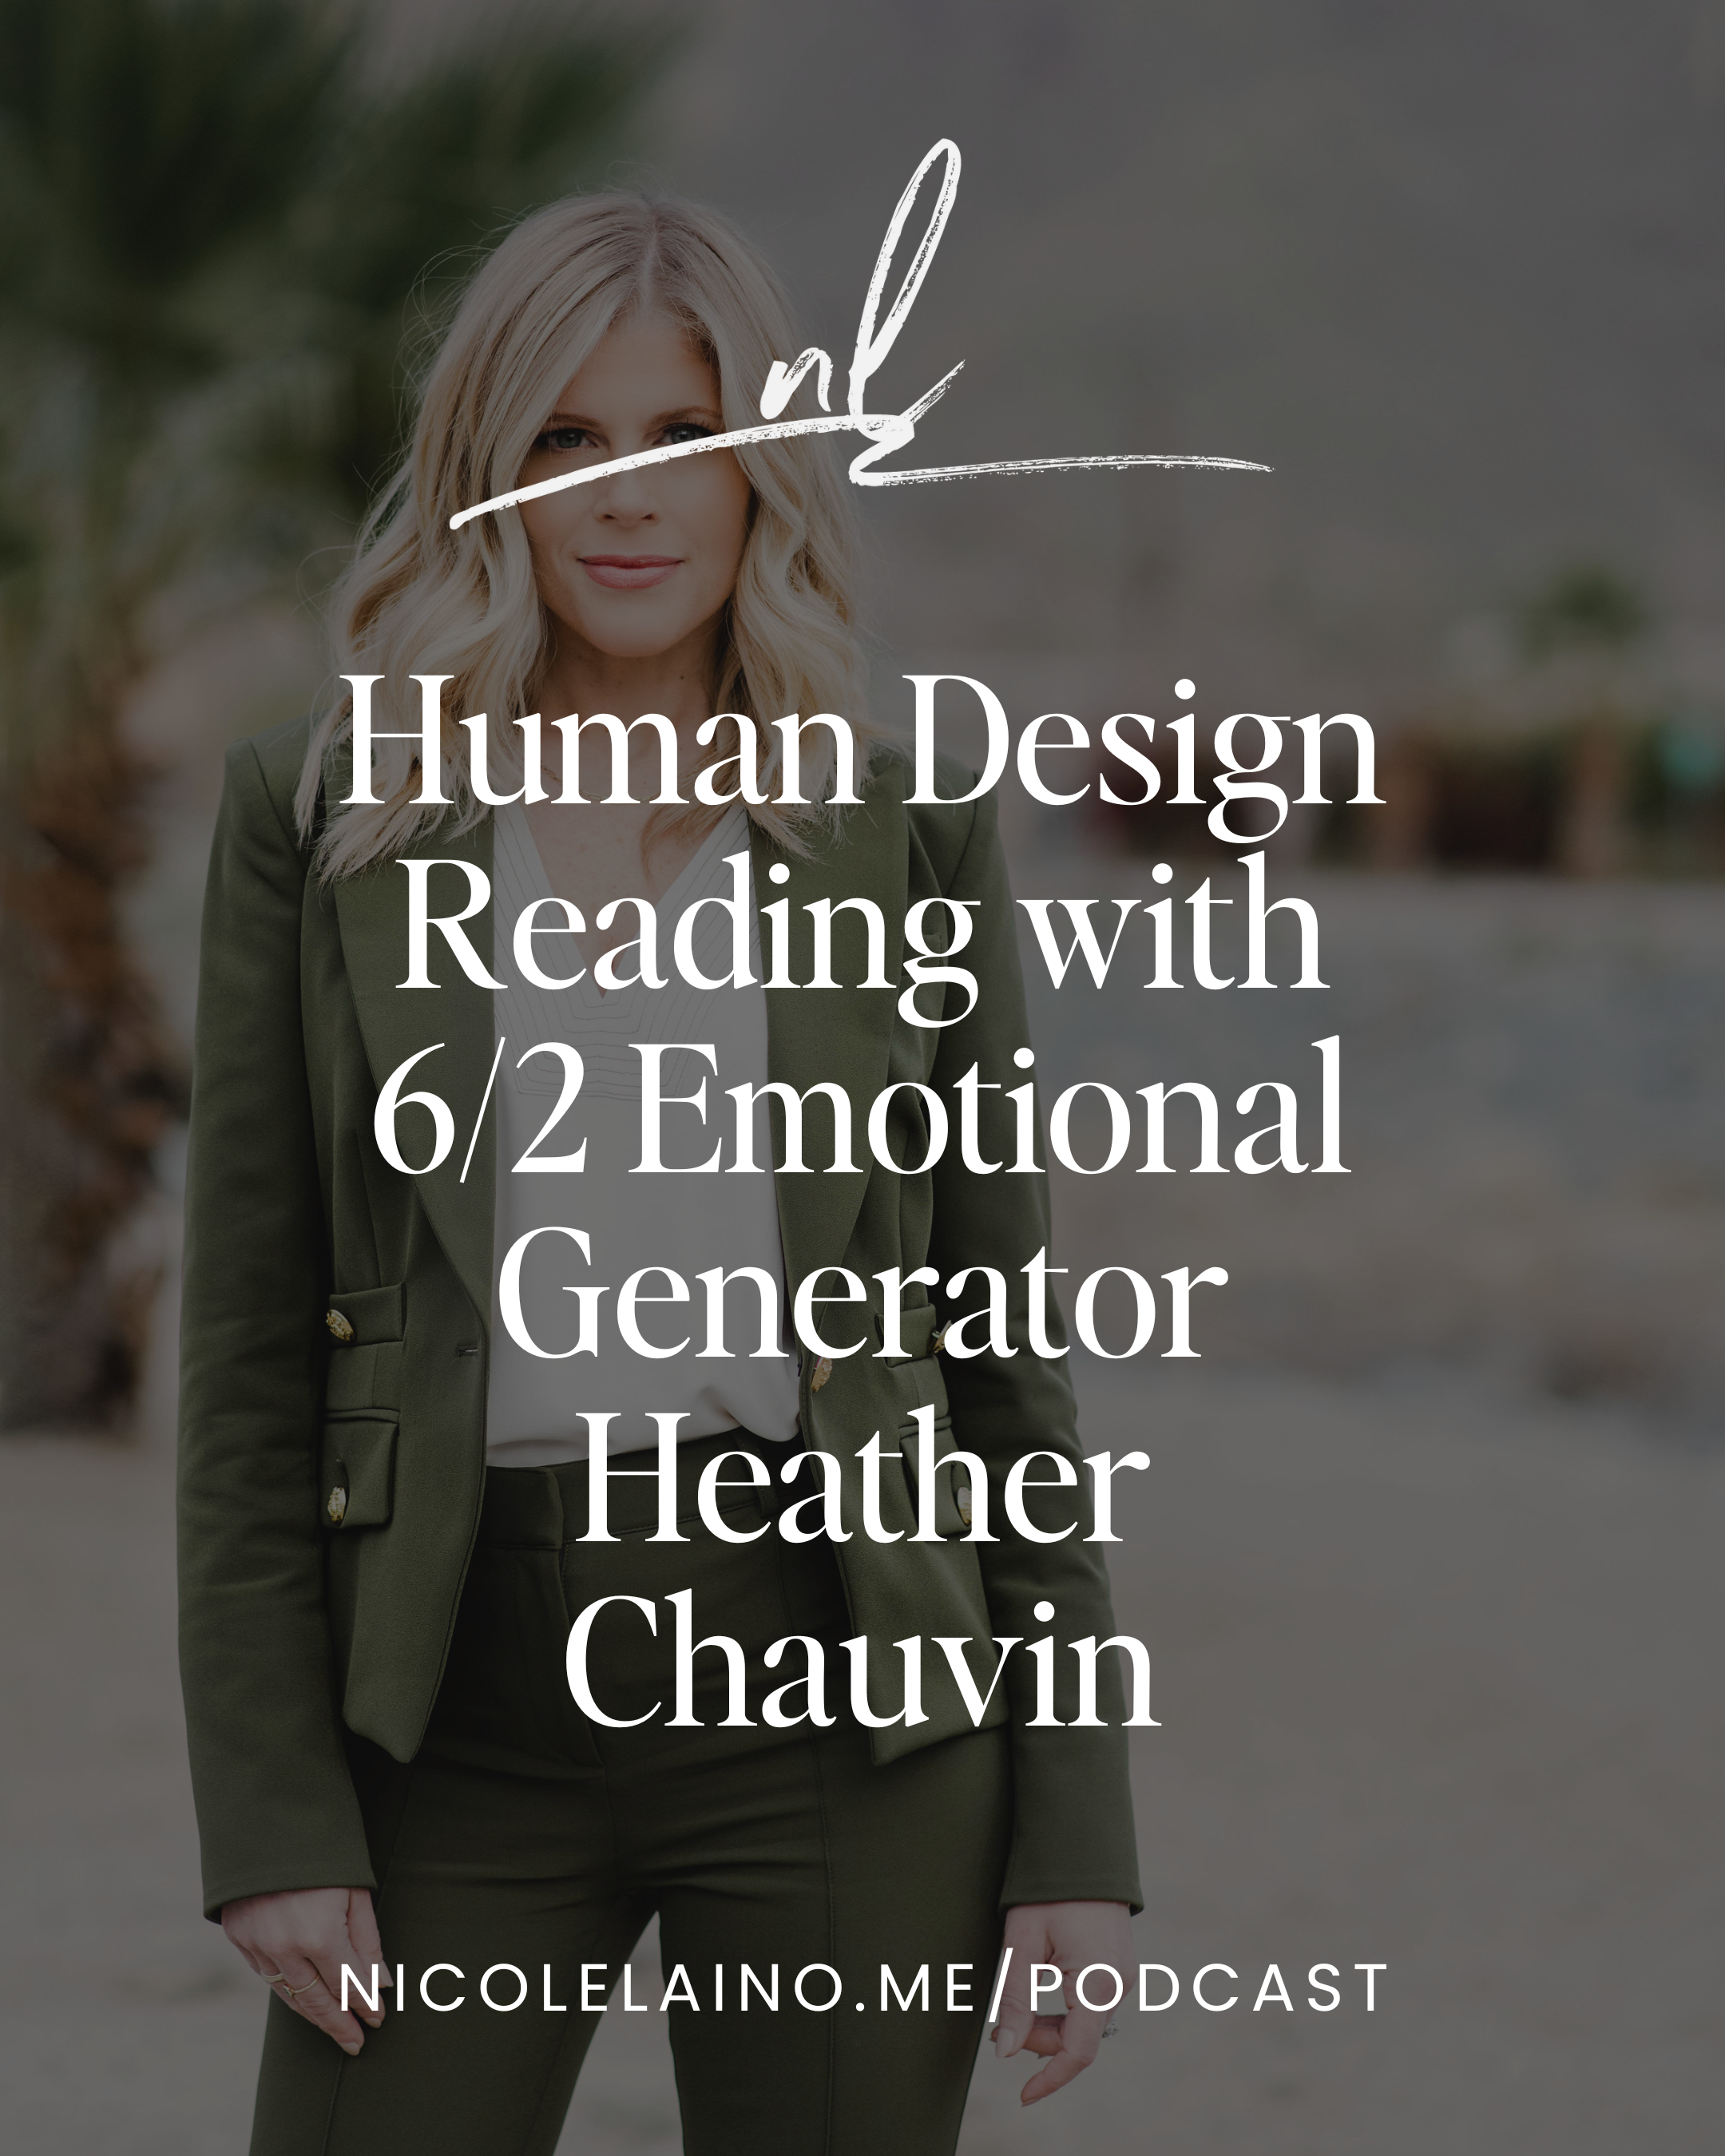 Human Design Reading with 6/2 Emotional Generator Heather Chauvin